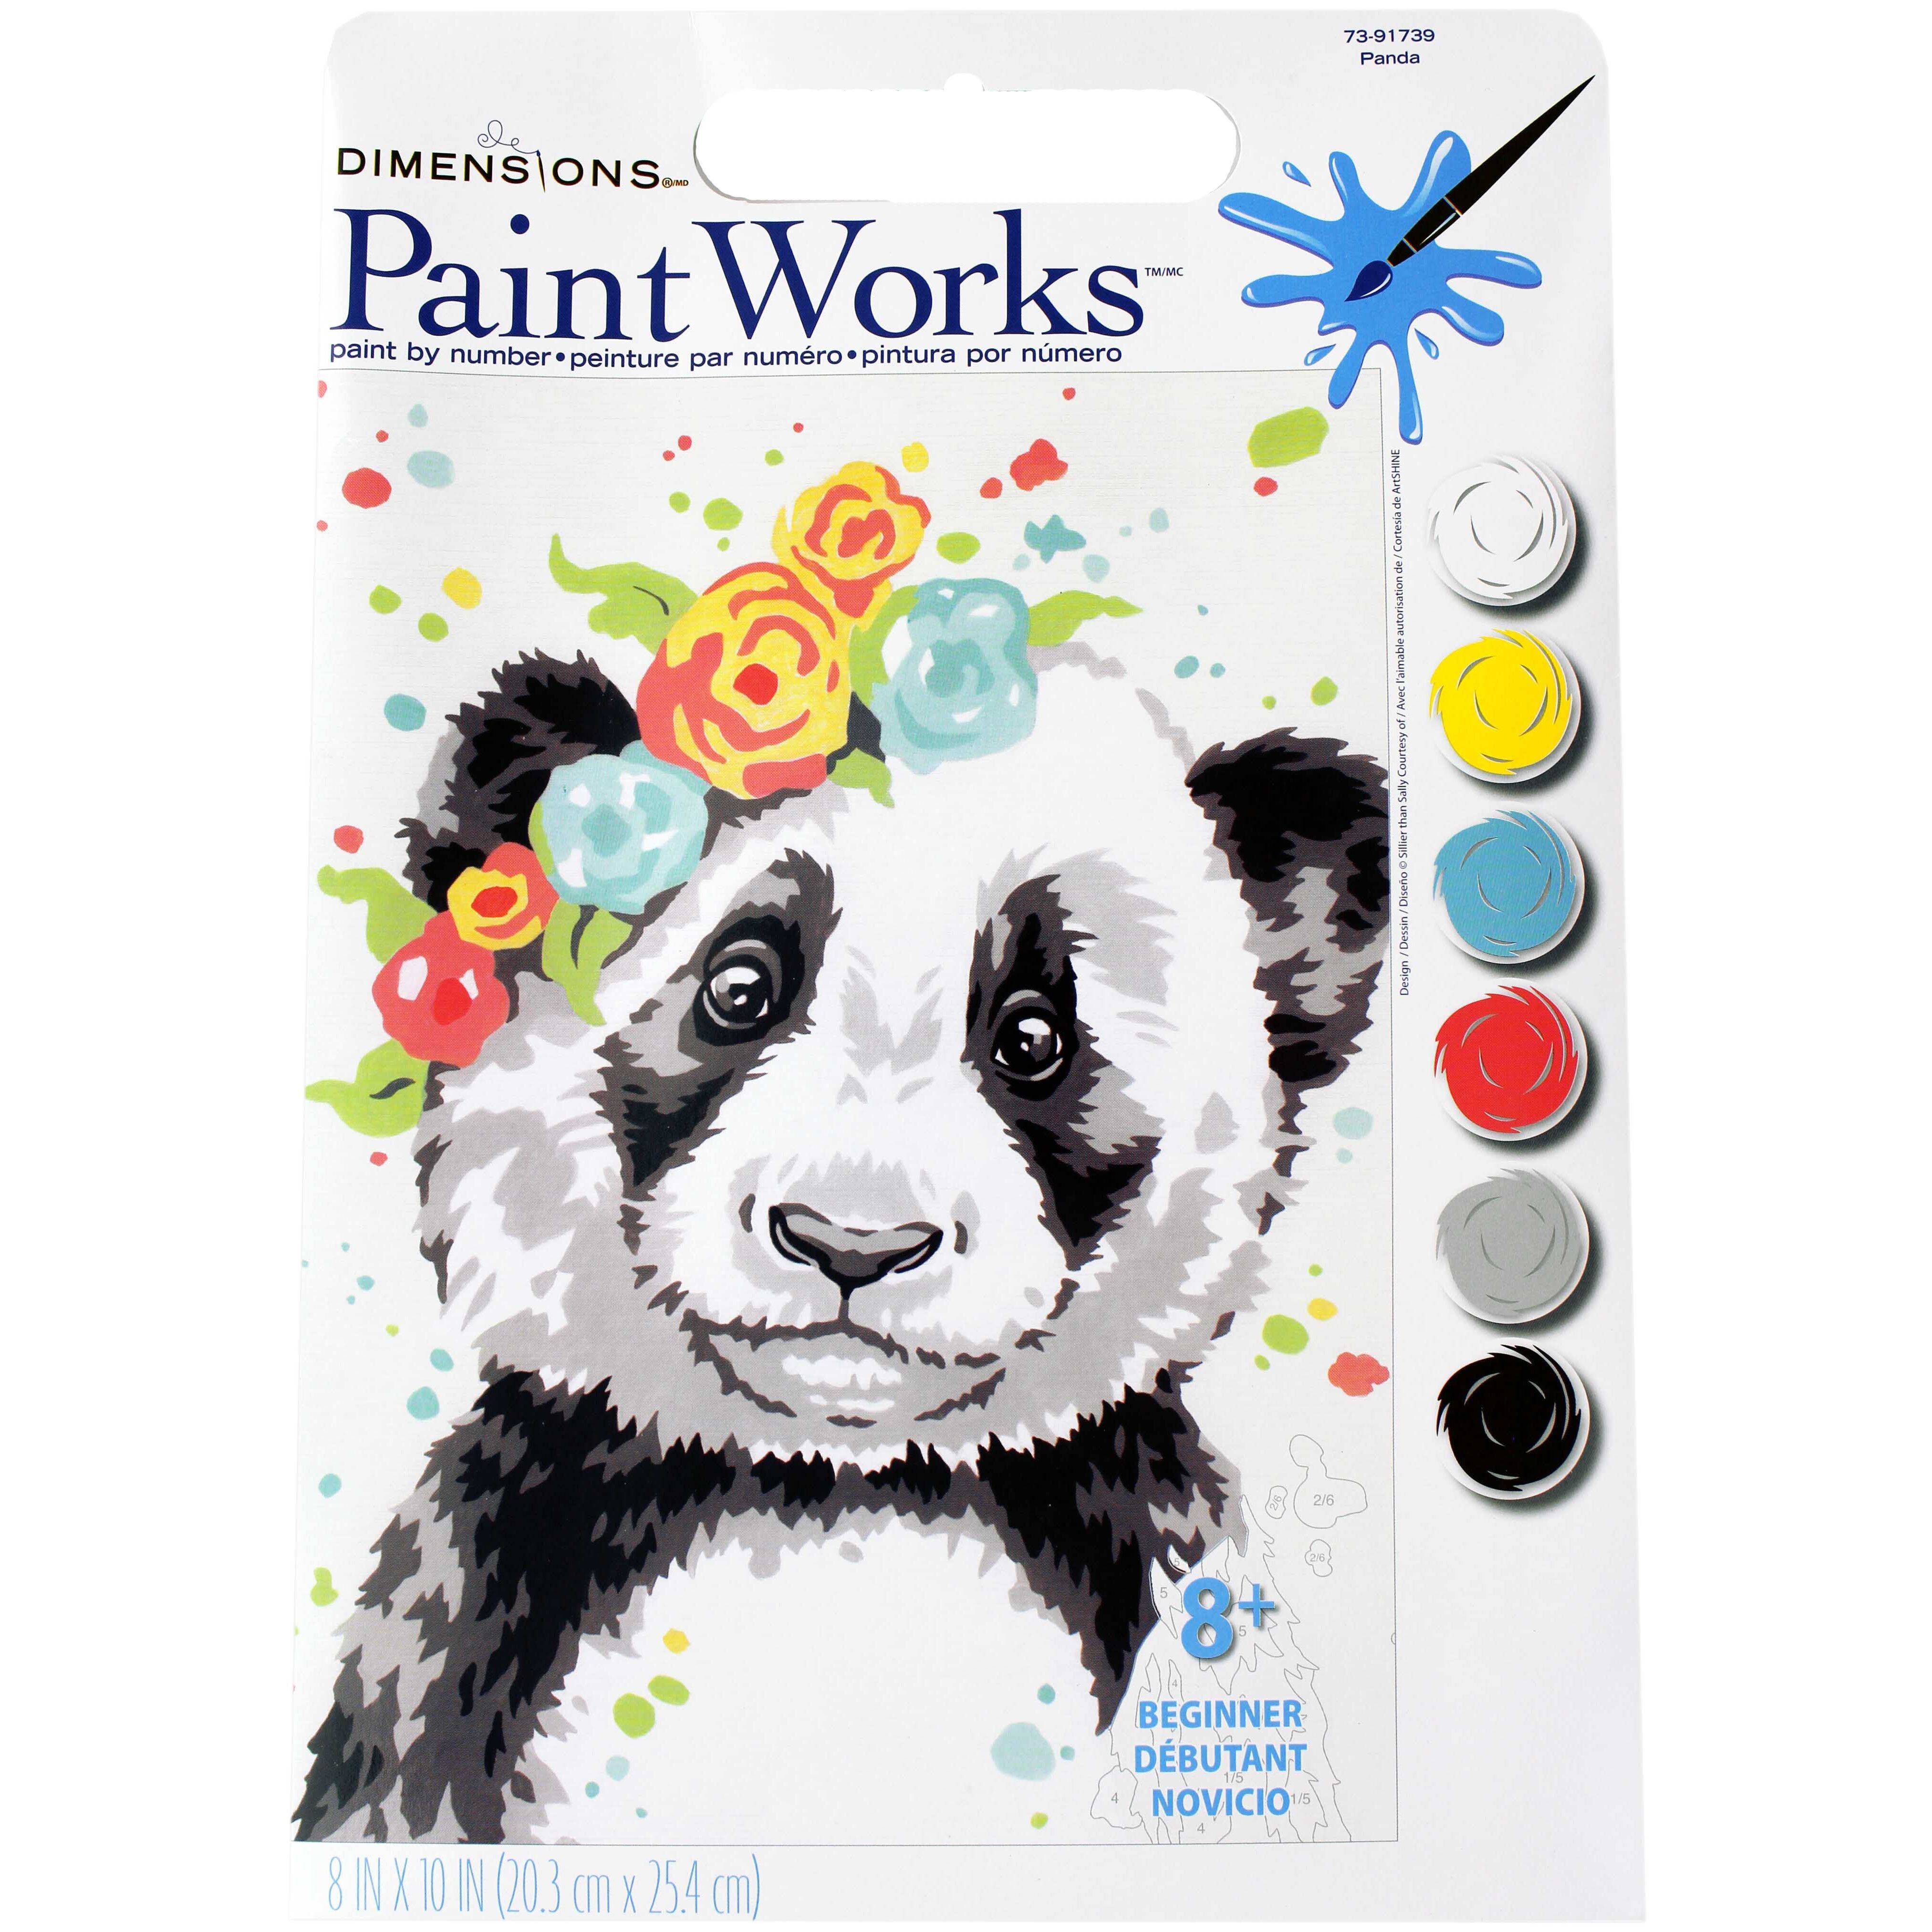 Paint Works Paint By Number Kit 8"X10" Panda